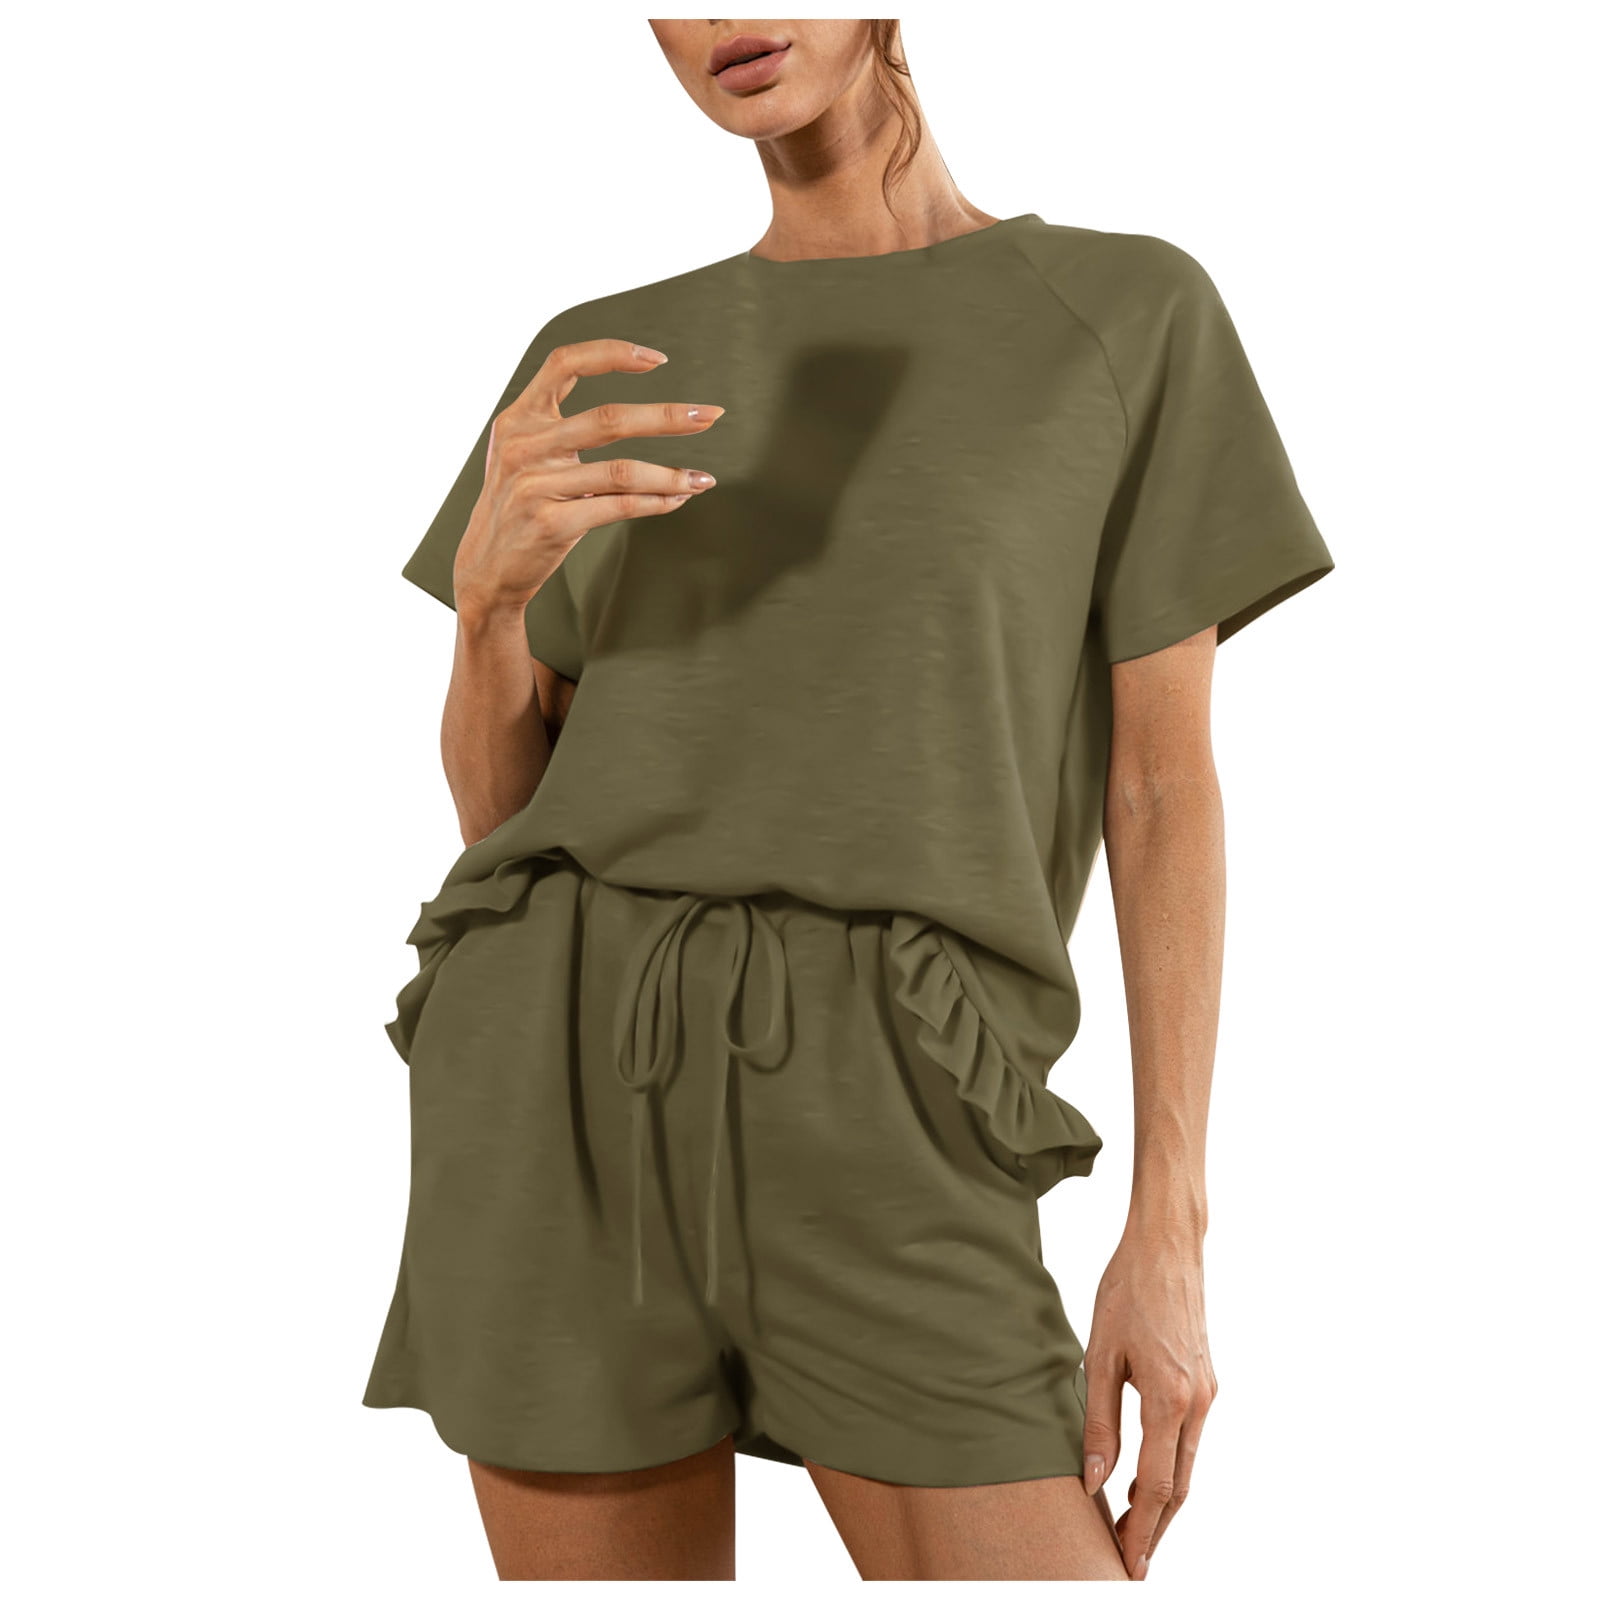 Up to 60% Off! pstuiky Two-Piece Set for Women,Women Short Sleeve V-Neck  T-Shirt and Shorts Basic 2-Piece Short Top Shorts Set Leisure Sales Today  Clearance Army Green L 